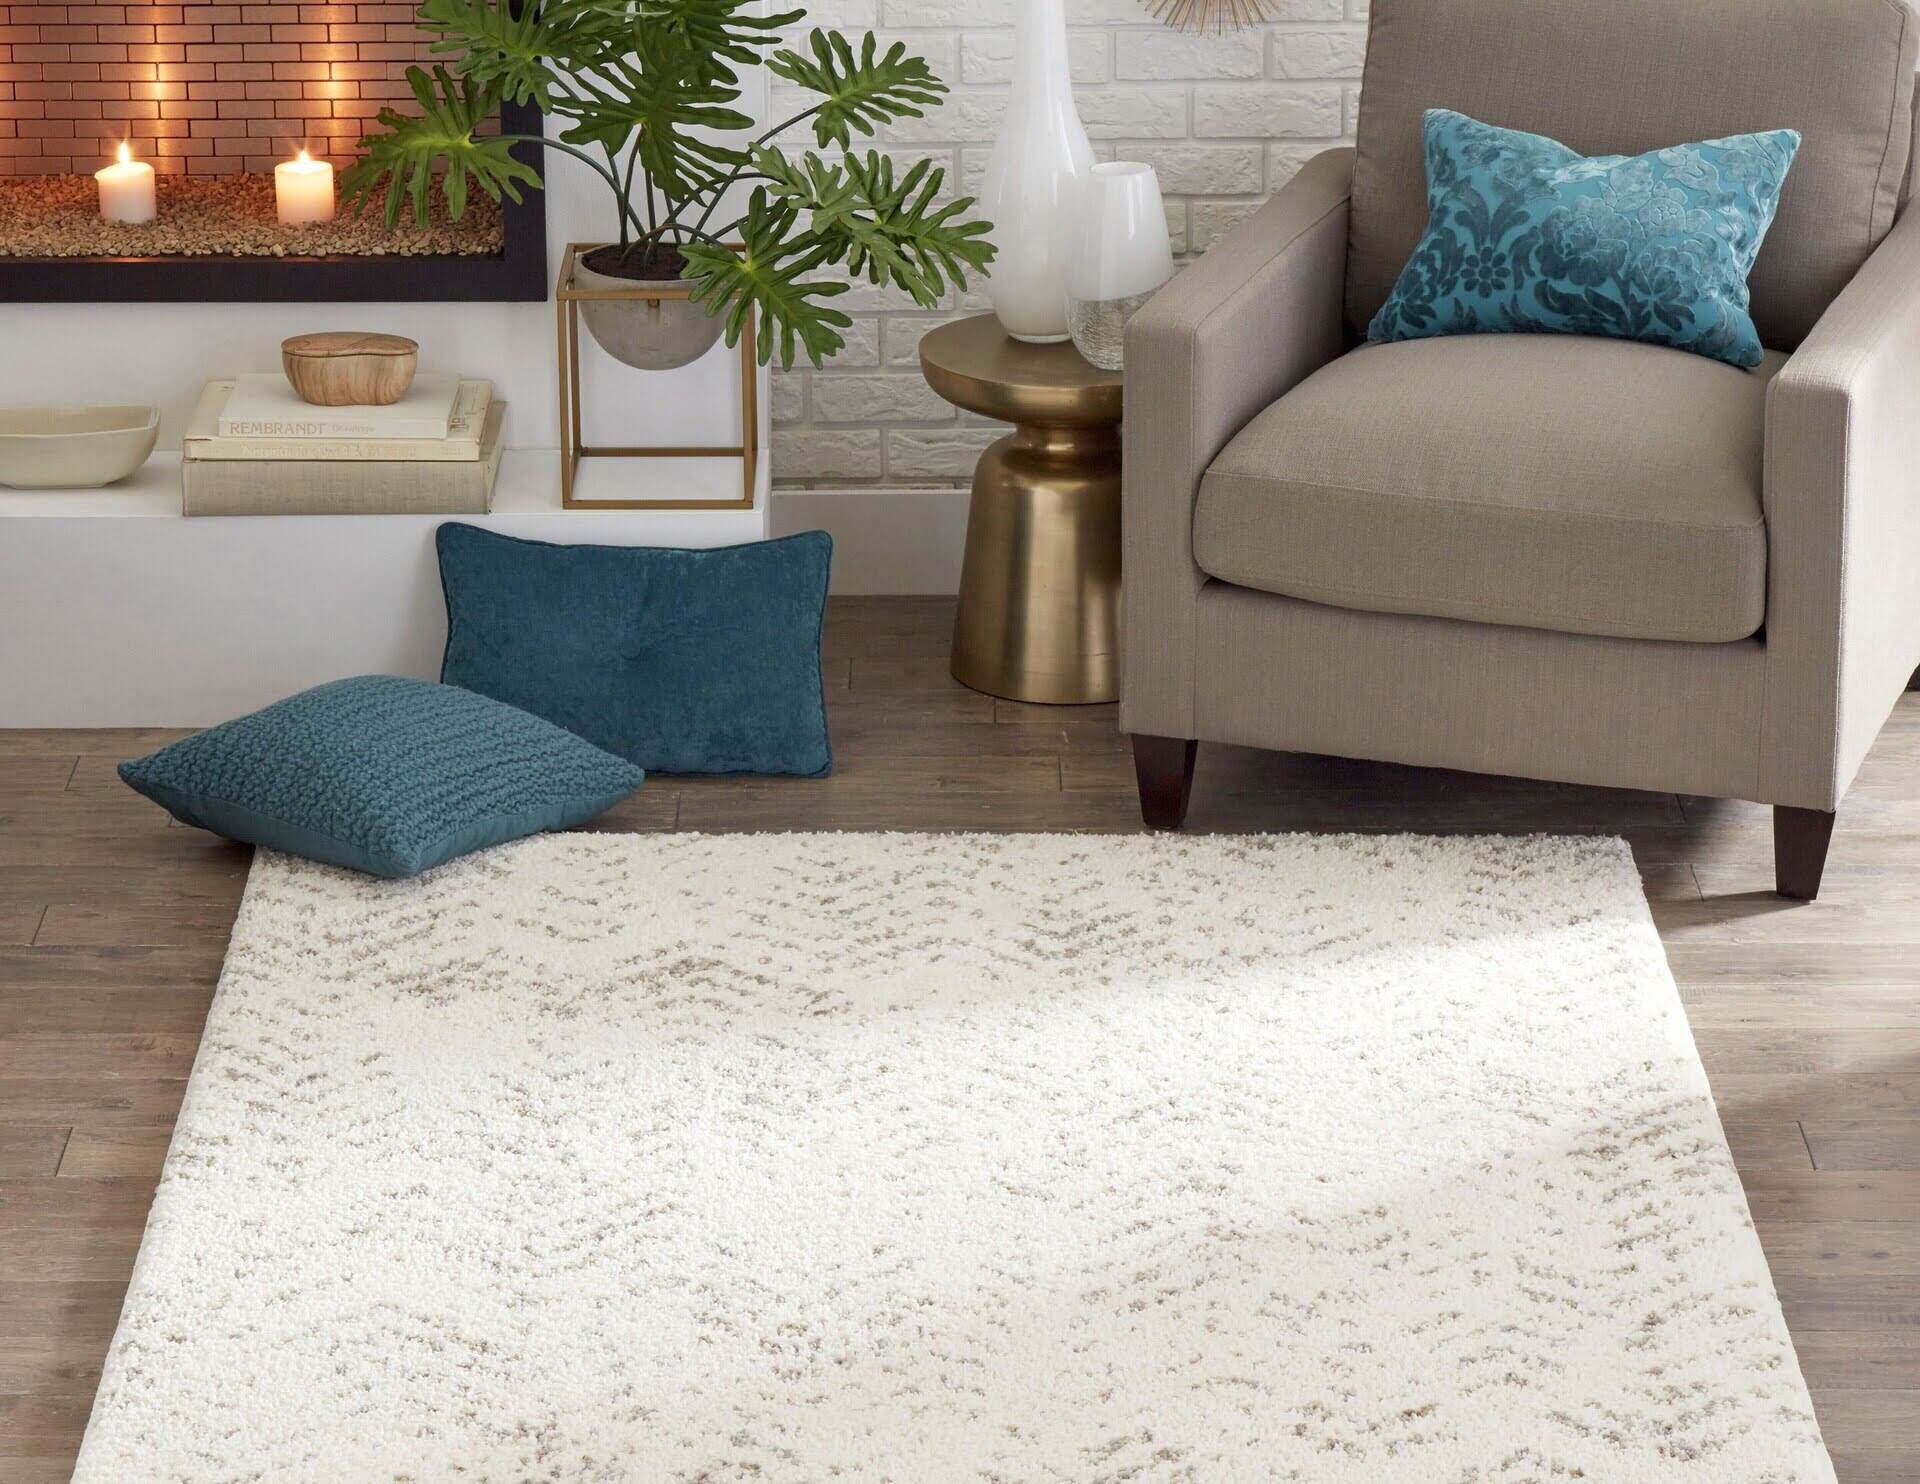 Ophanie Small Throw Rugs for Bedroom, 2x3 Non Slip Mini Area Rug,  Affordable Fluffy Grey Carpet, Door Entryway Indoor Inside Front Entrance  Dog Mat